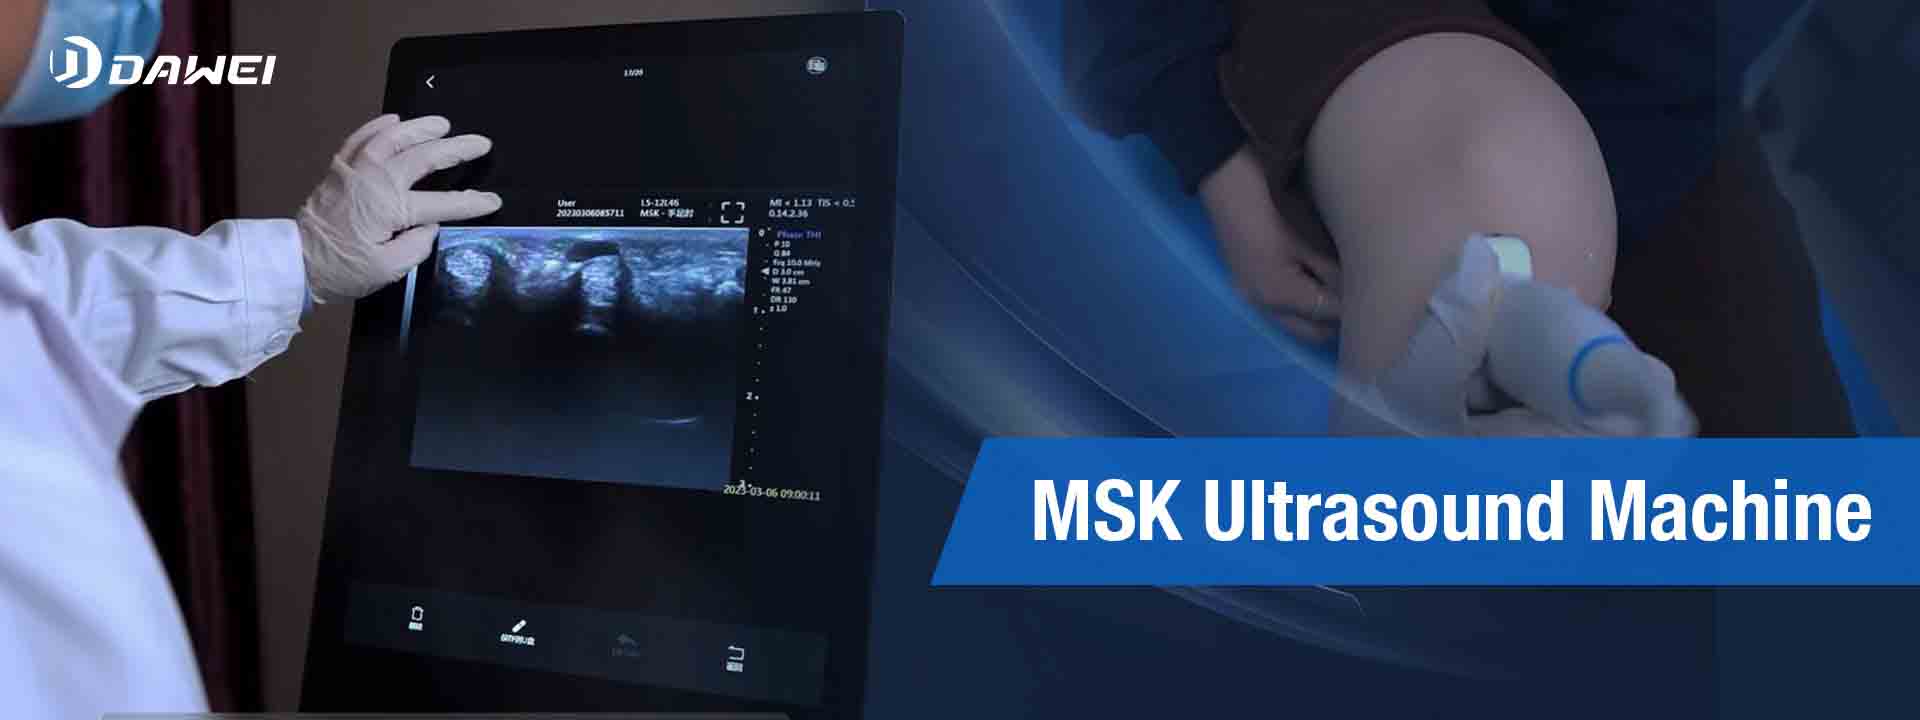 Inneal Ultrasound MSK airson a reic